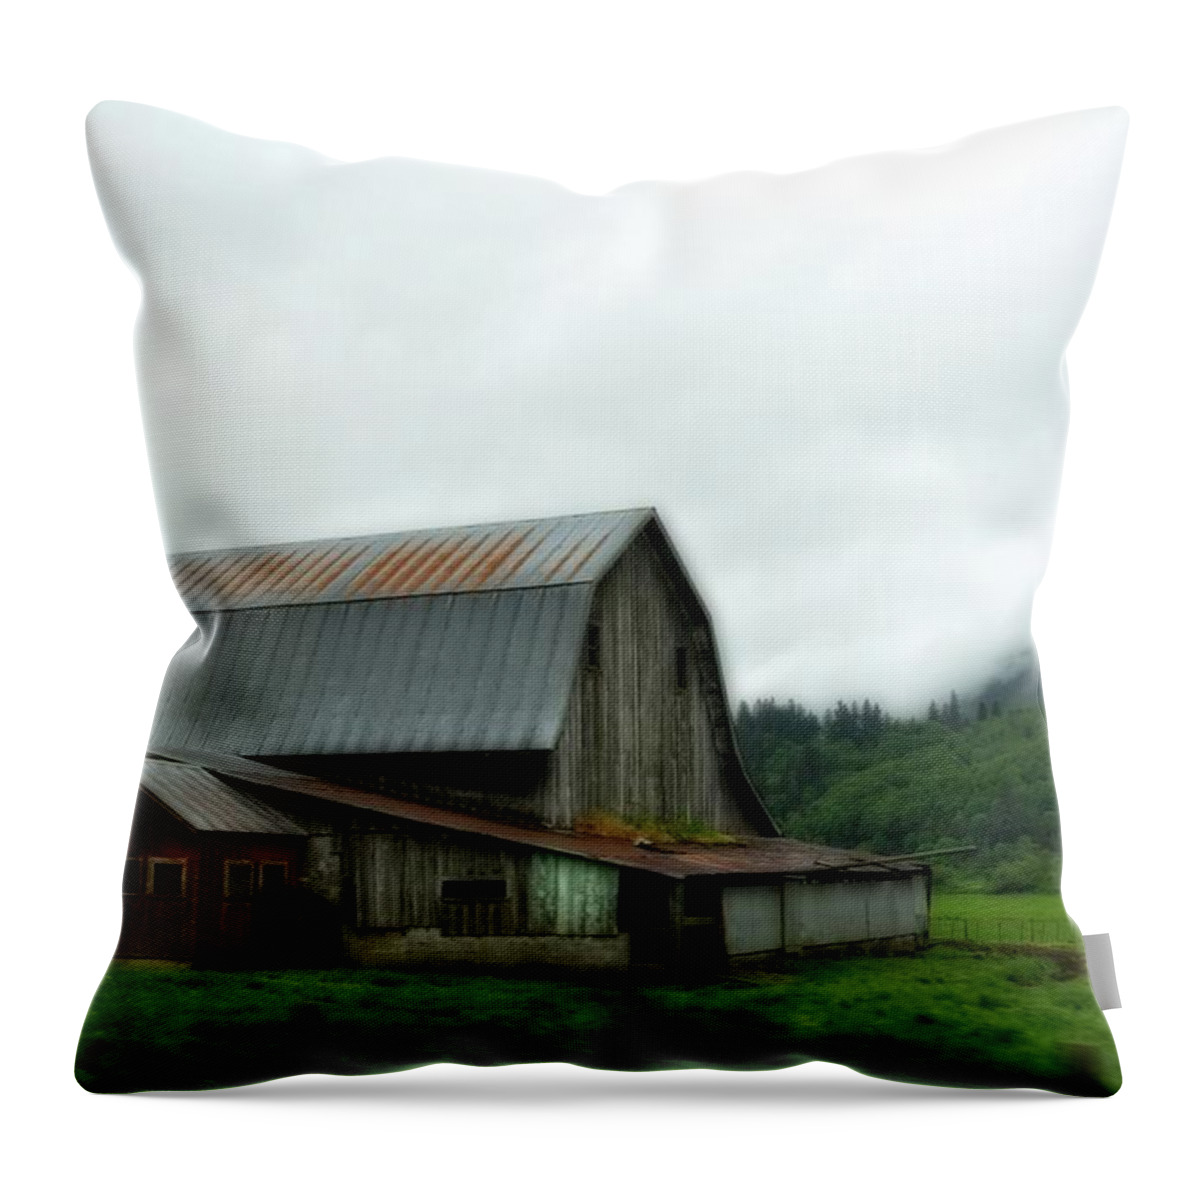 Oregon Throw Pillow featuring the photograph Oregon - Barn by Image Takers Photography LLC